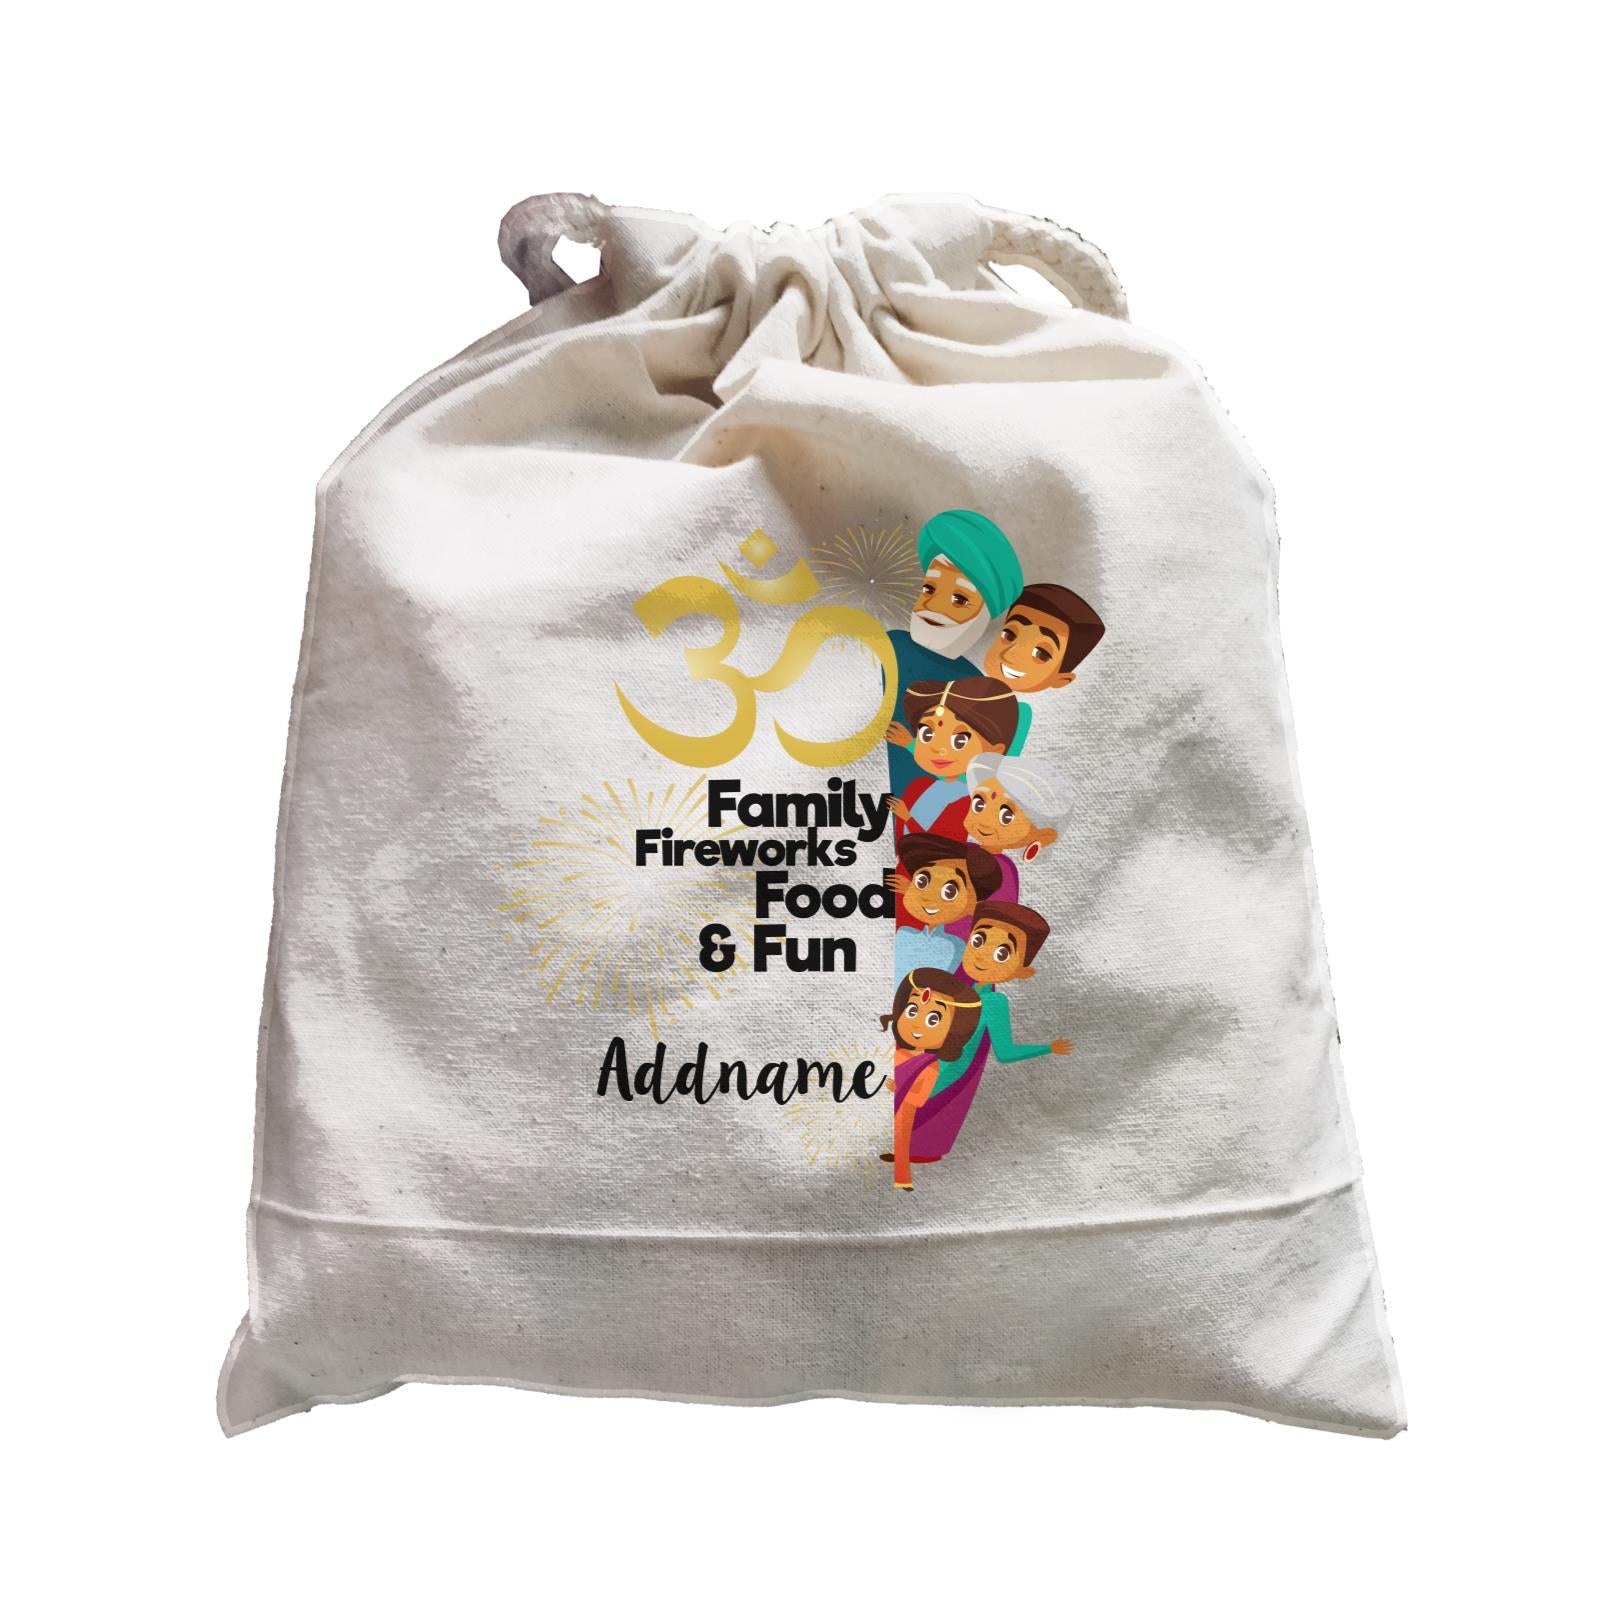 Cute Family OM Family Fireworks Food and Fun Addname Satchel